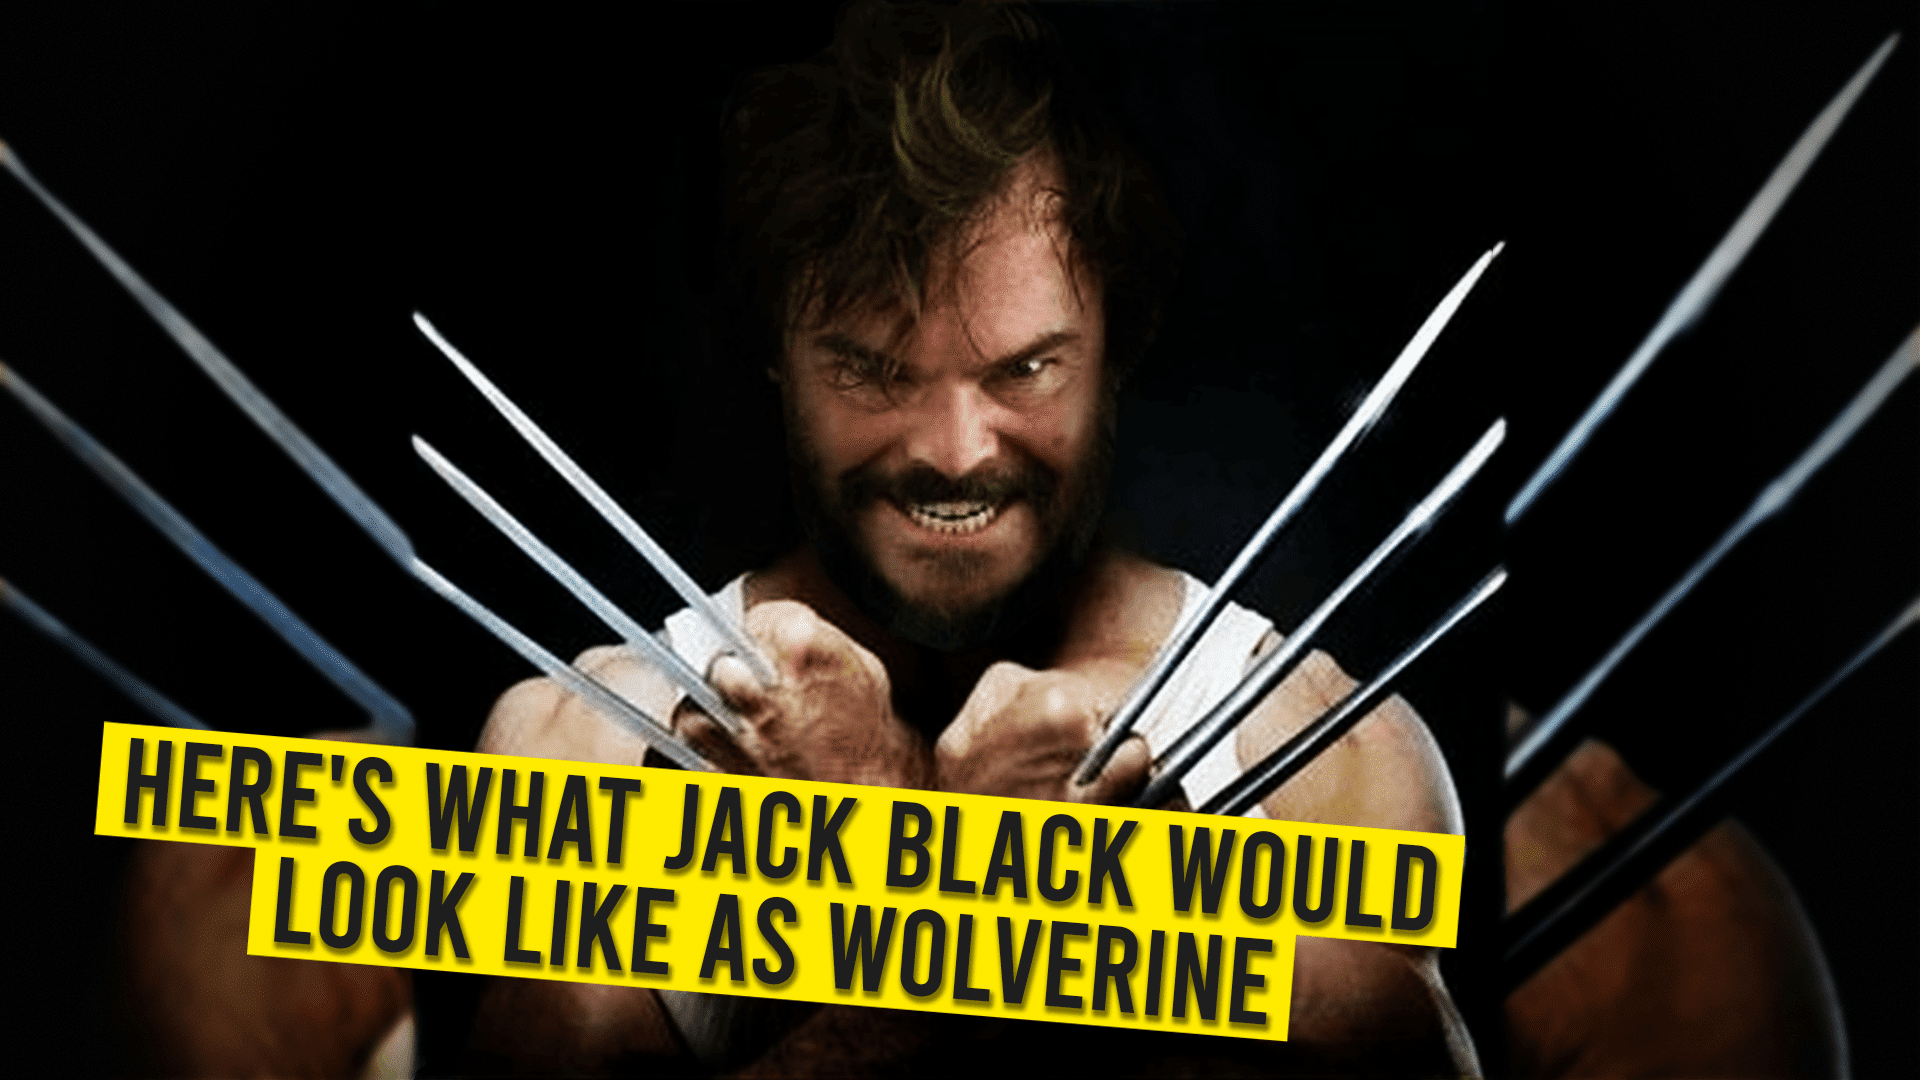 Here’s What Jack Black Would Look Like as Wolverine